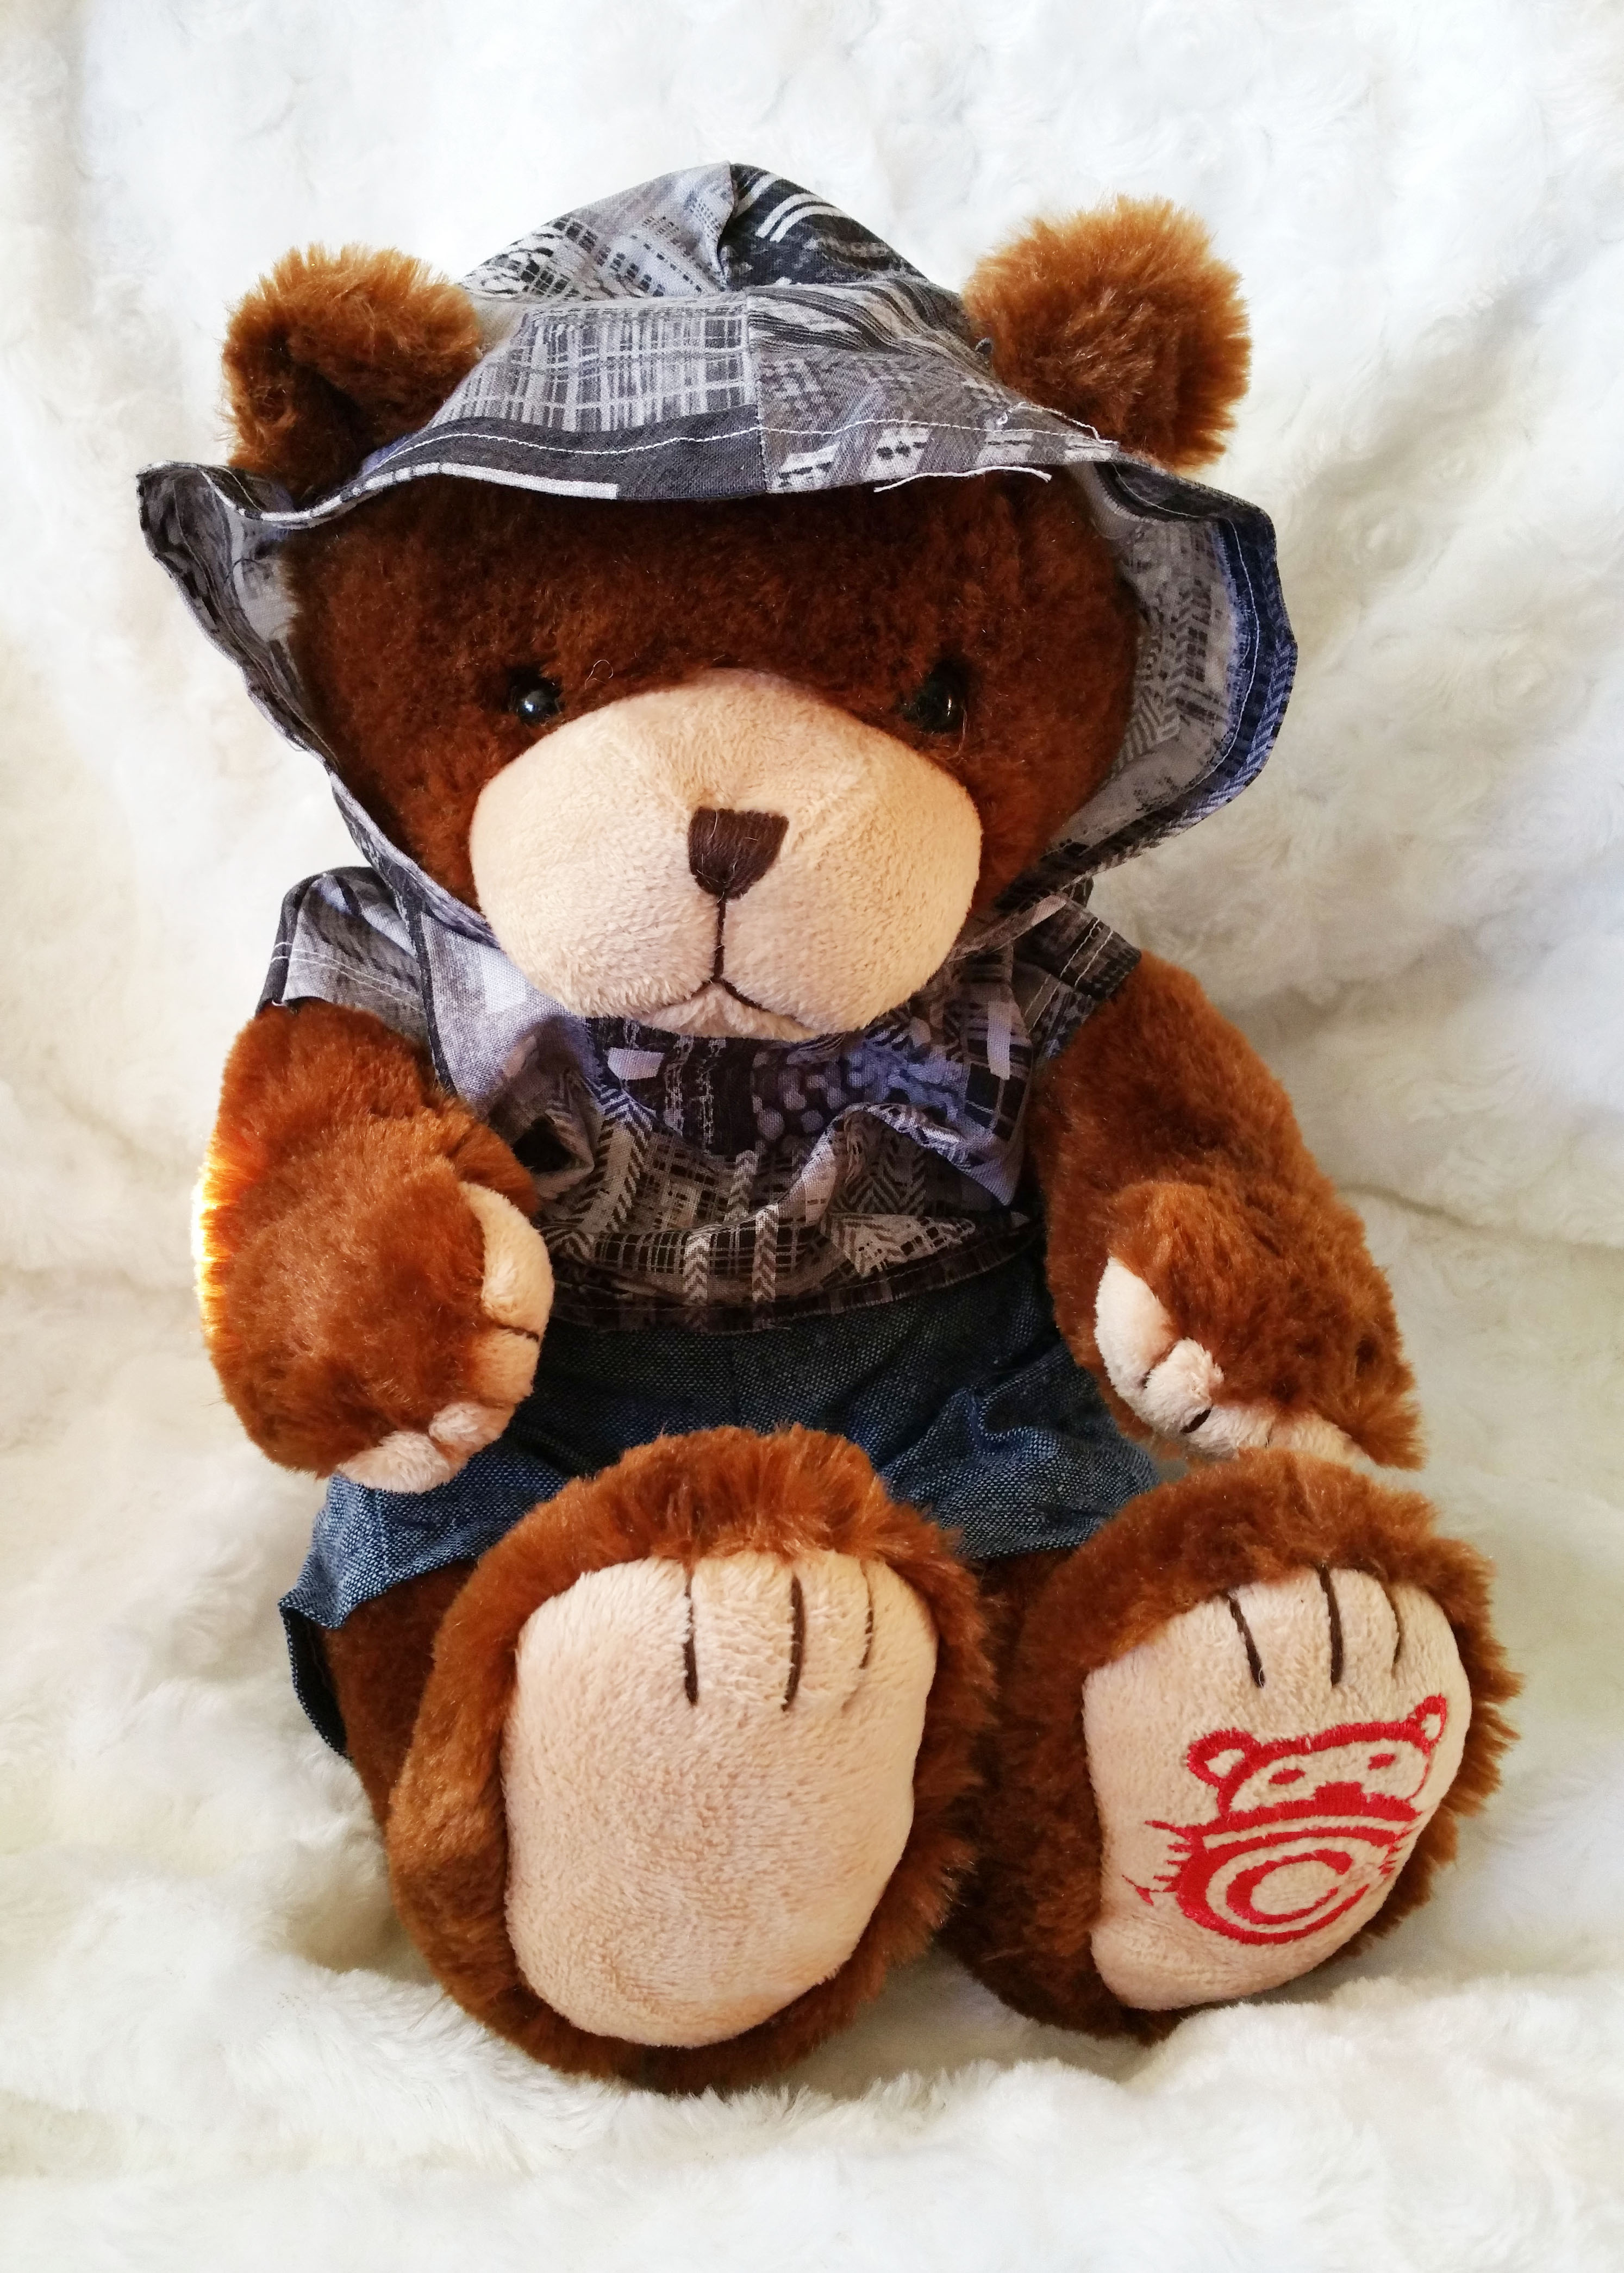 Teddy Canz, Teddy bear, lifestyle, family, children, gift idea, toy, stuffed animal, kids, teddy in a can, collectibles, unique gift, childhood toy, Teddy Canz gift, Toys for Tots, plush, stuffed animal,